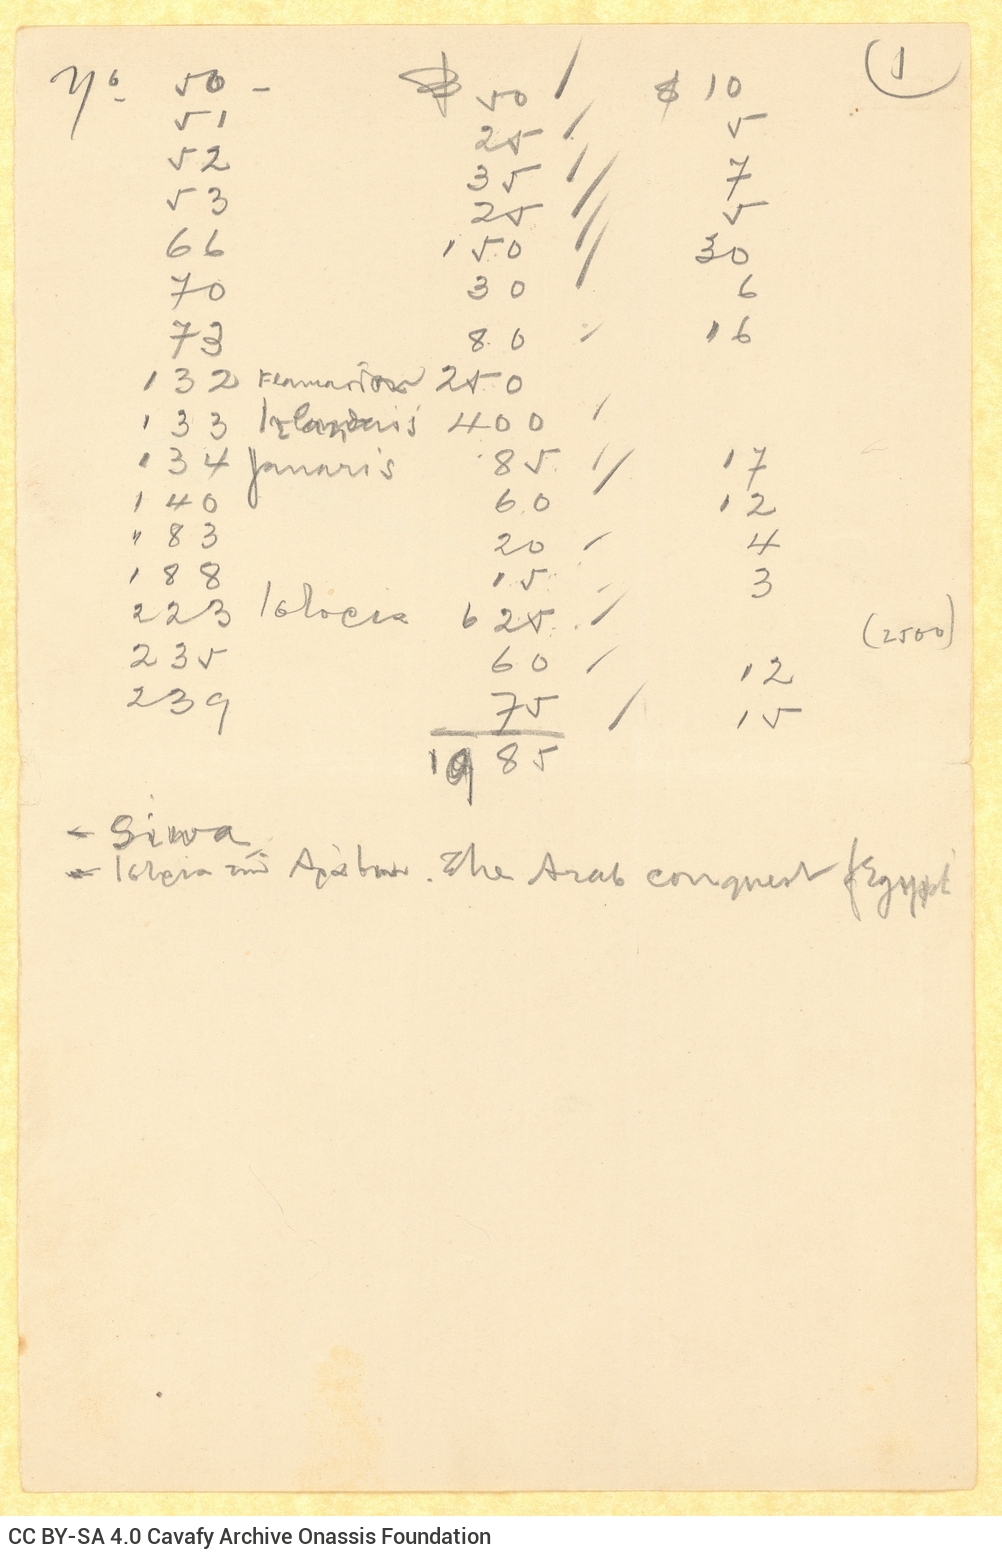 Notes on two sheets, numbered "Ι" and "ΙΙ". References to book titles, authors and purchase prices.